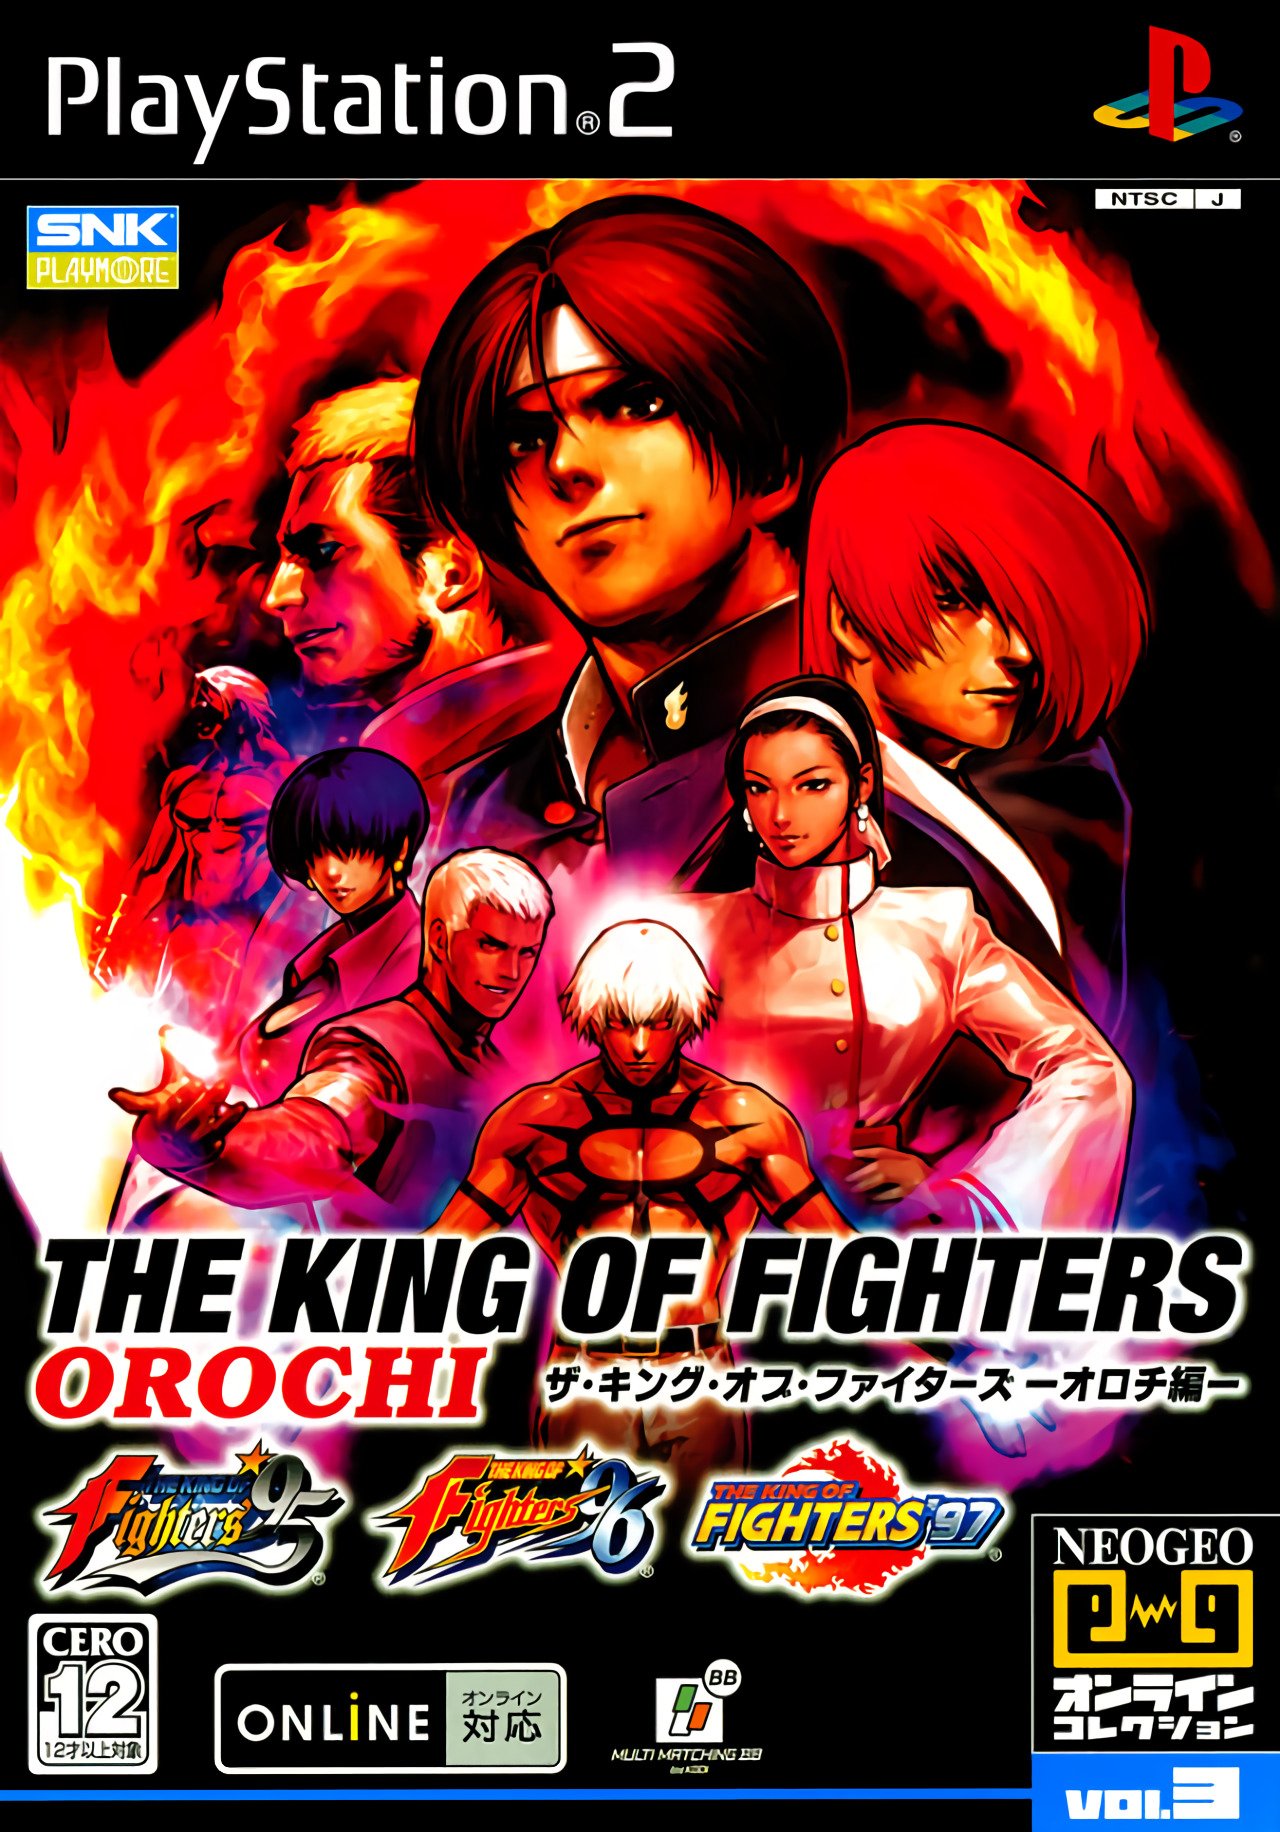 The King of Fighters: Orochi-Hen